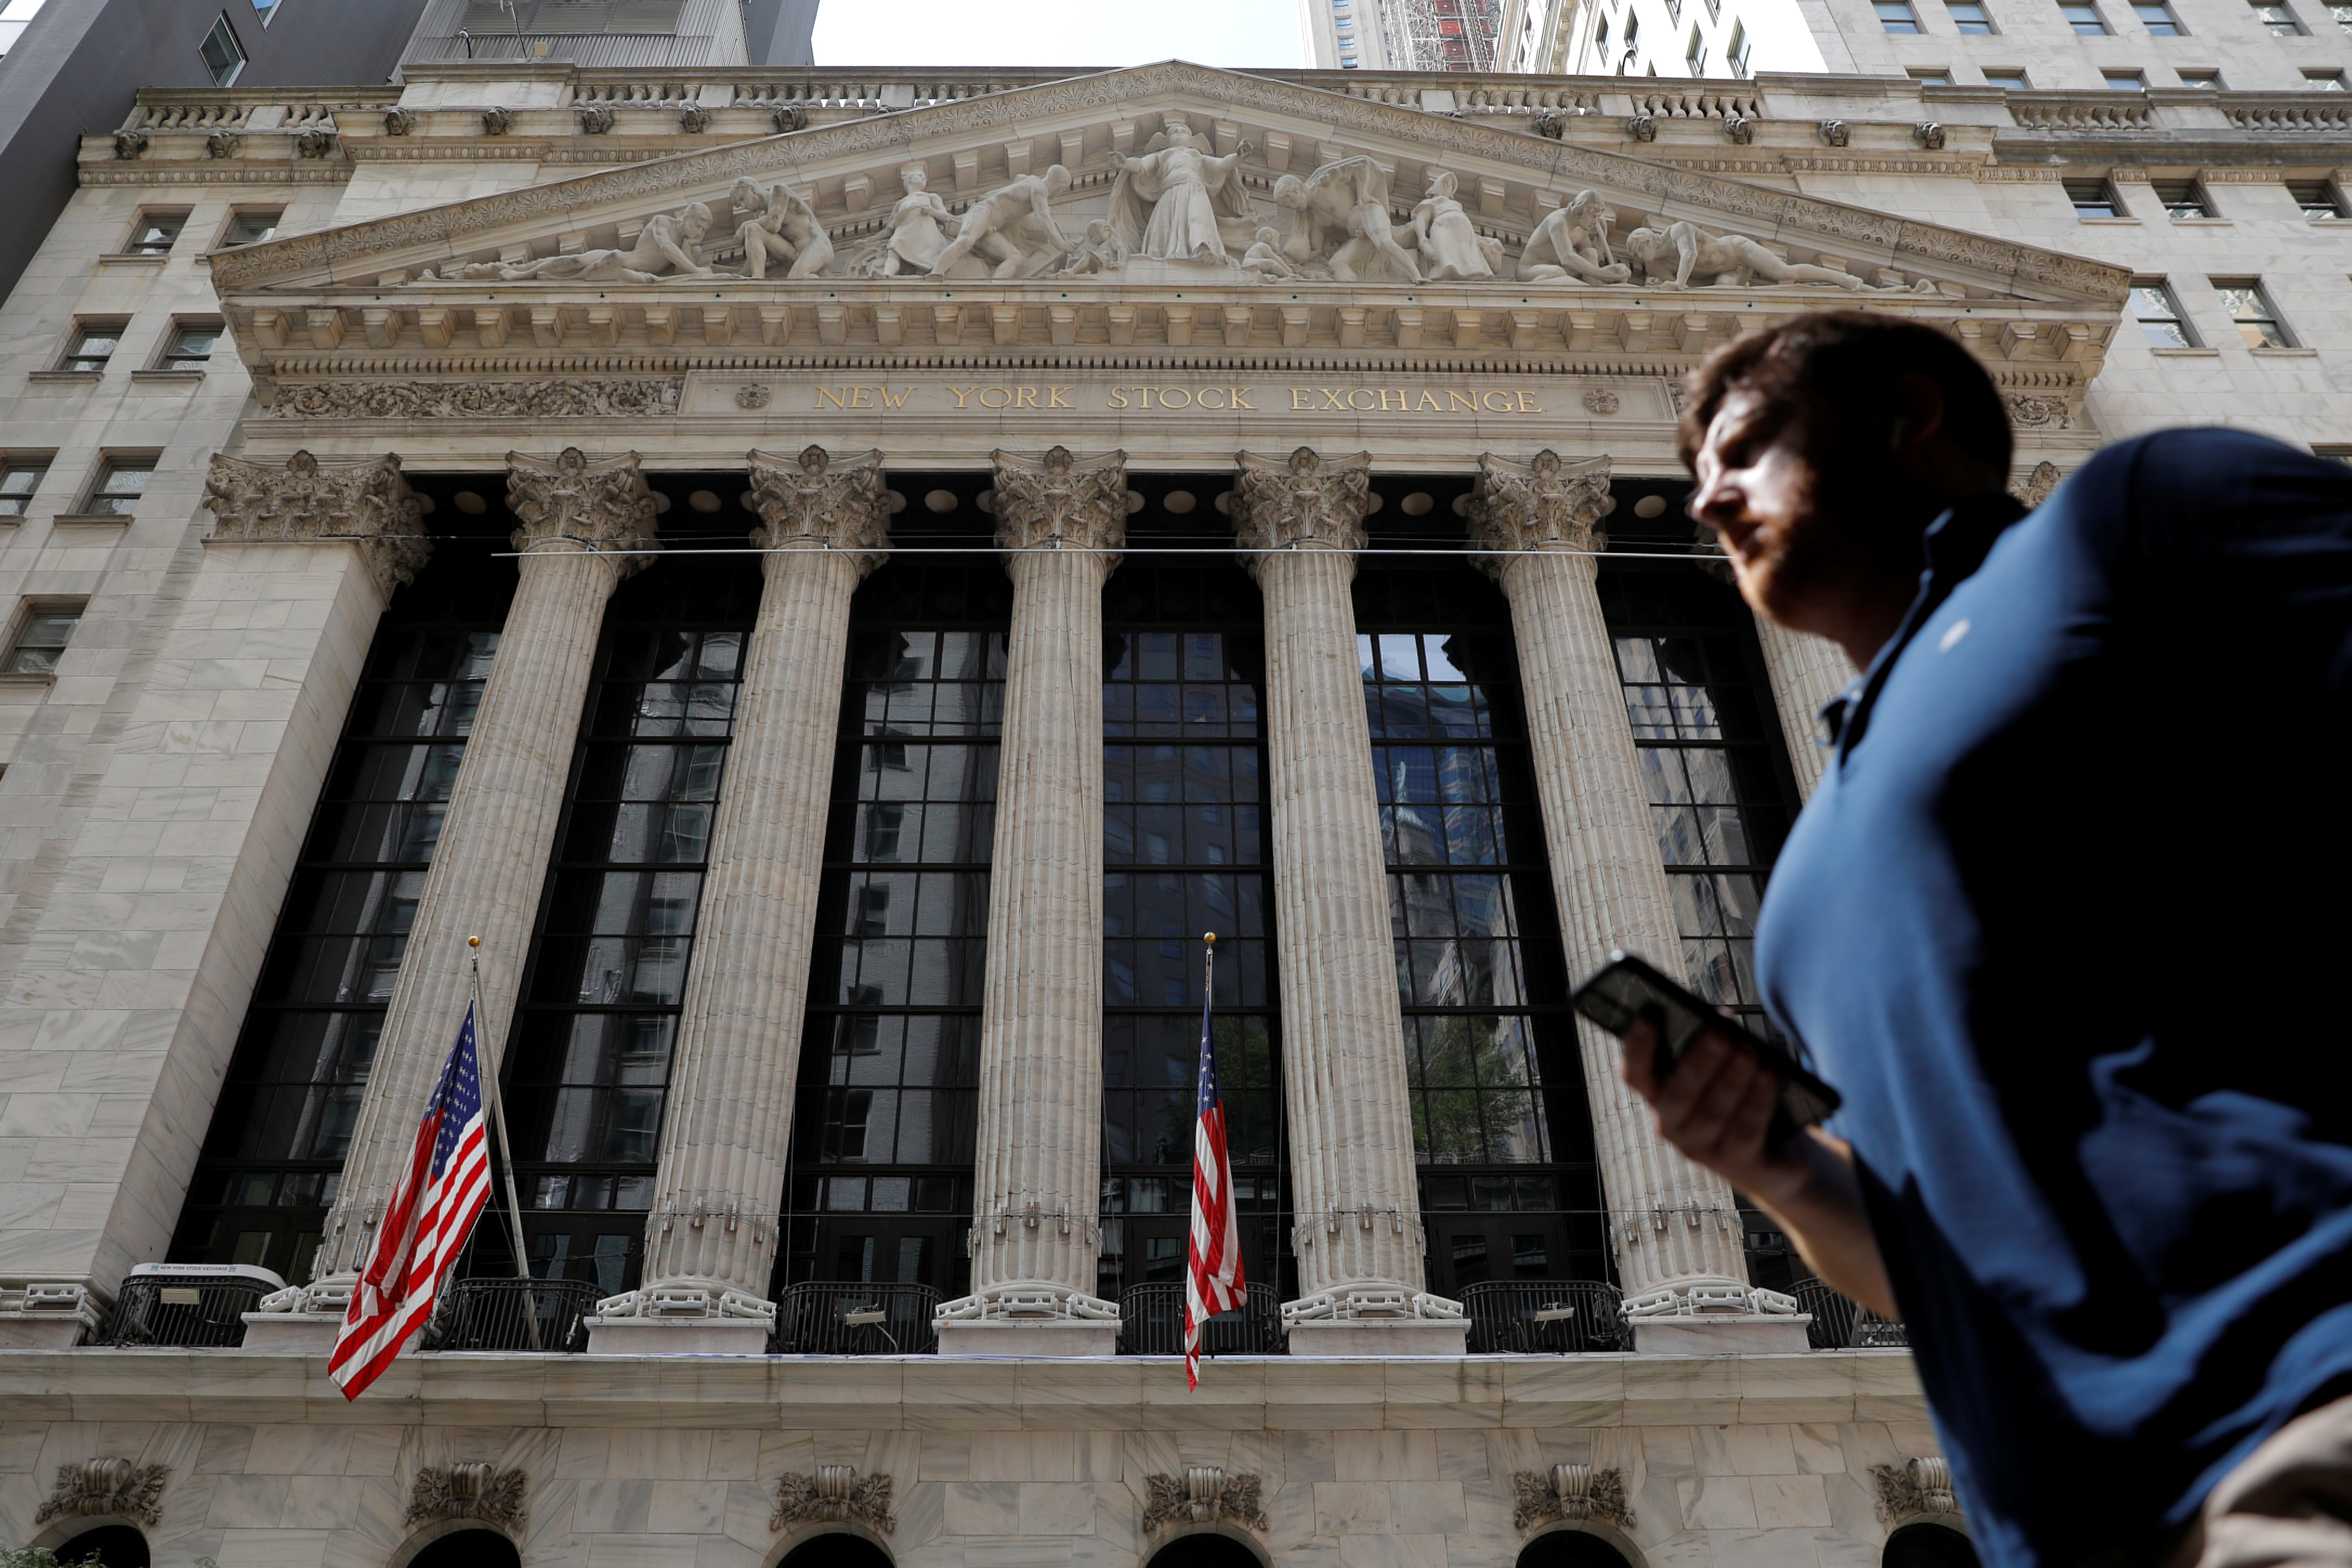 A person walks by the New York Stock Exchange (NYSE) in New York City, New York